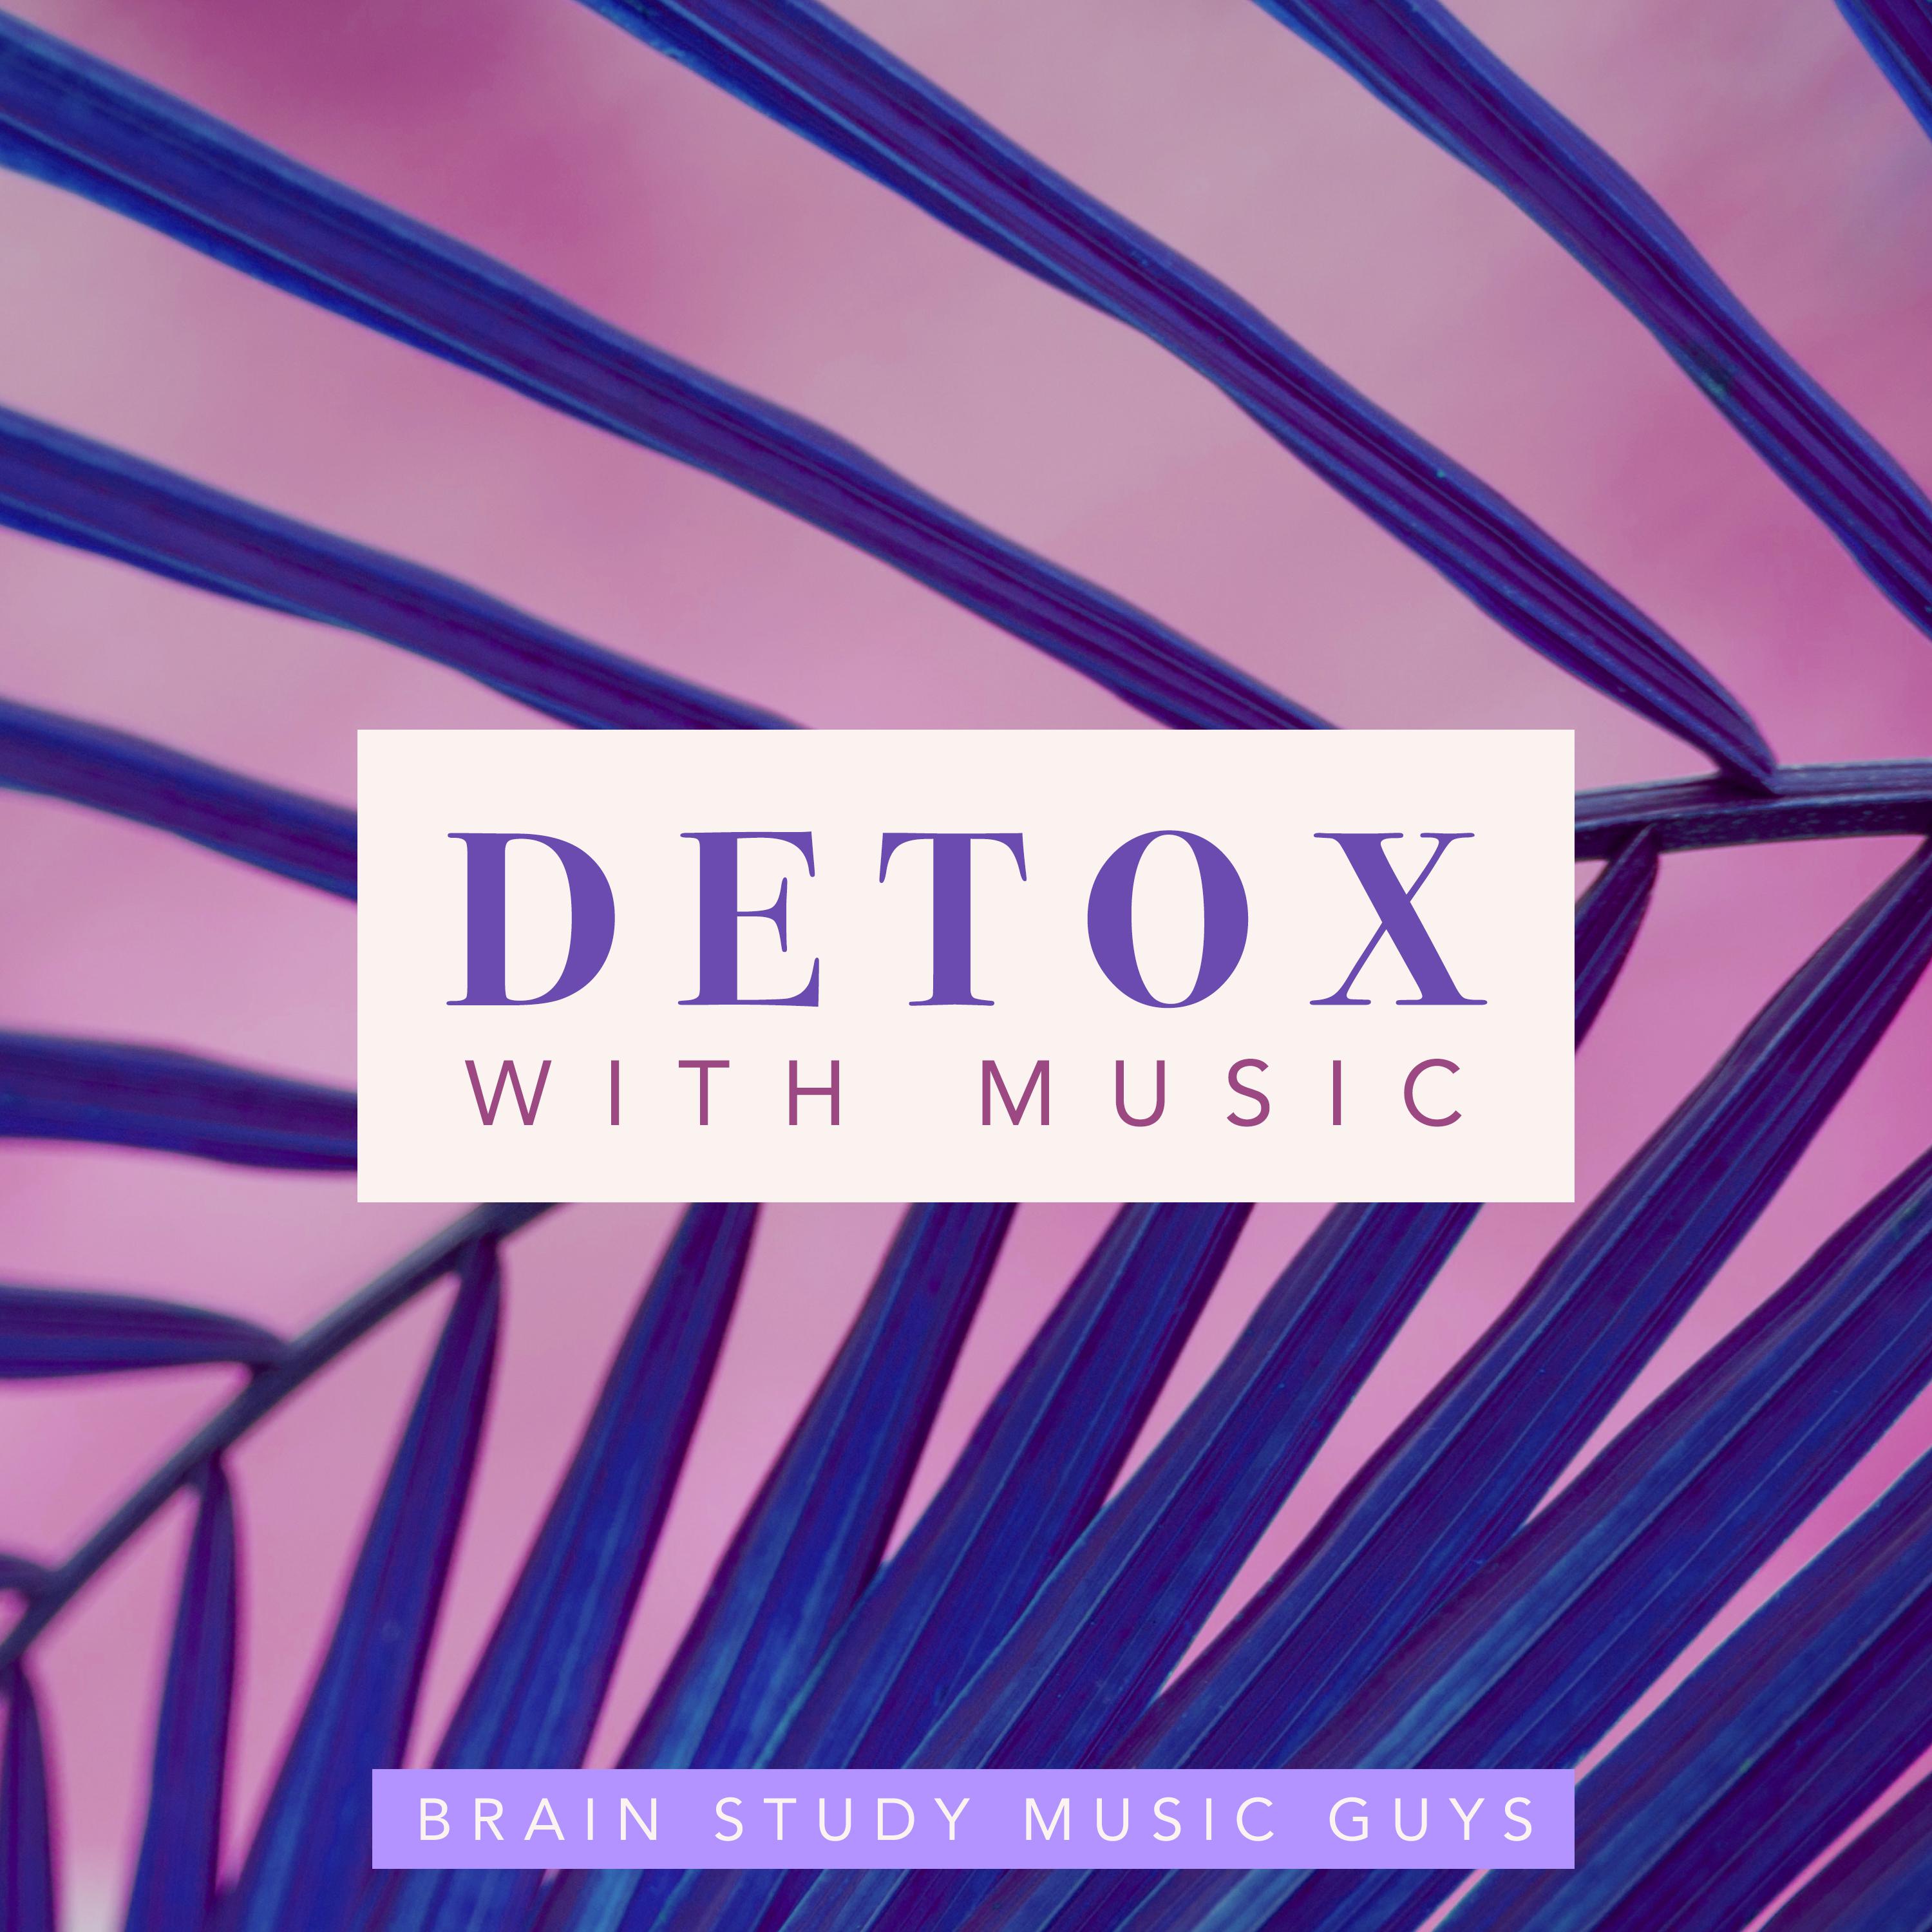 Detox with Music